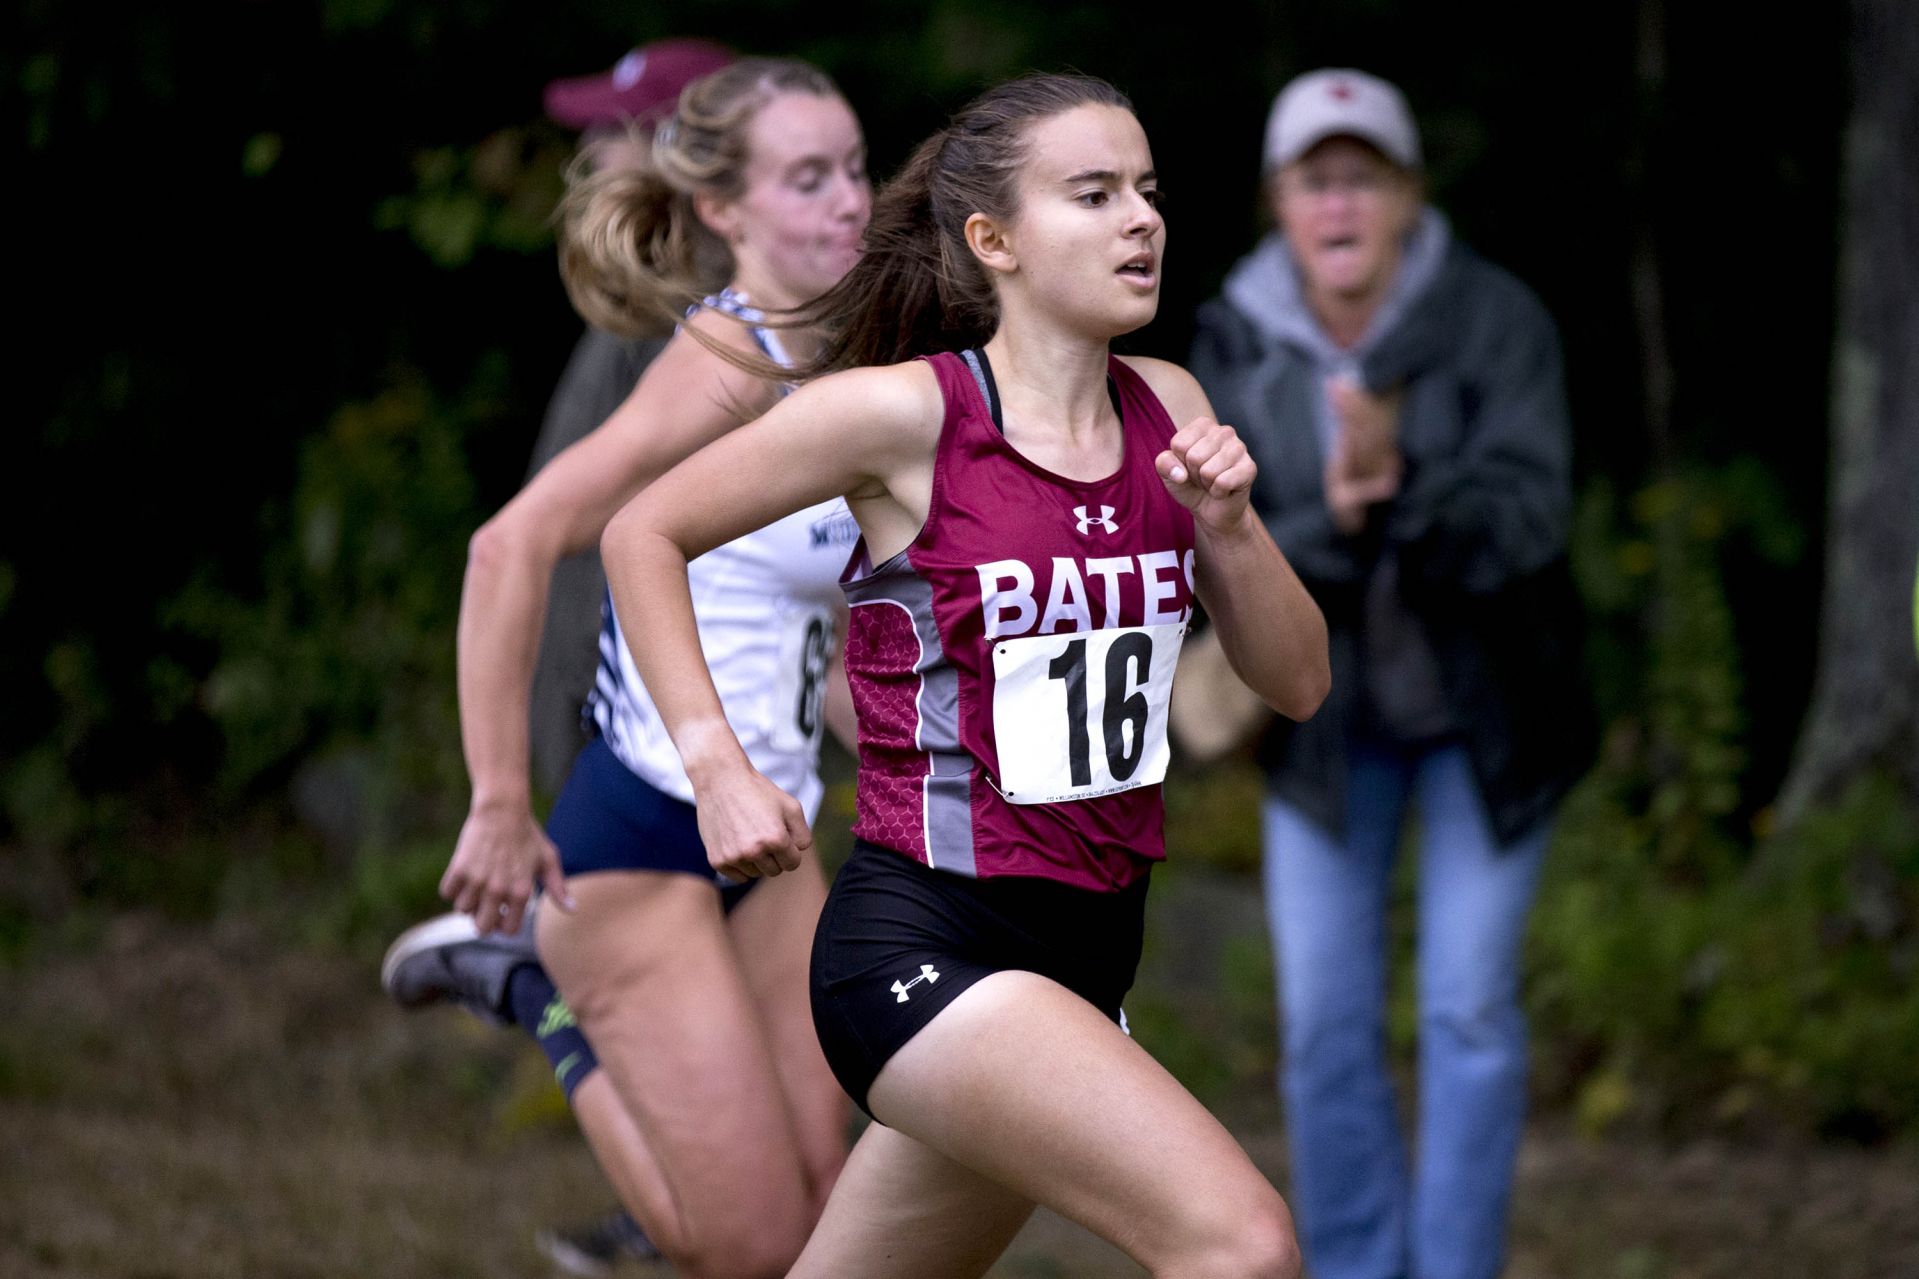 Bates takes second place in Bates Invitational with Tufts, Middlebury, and Conn College.